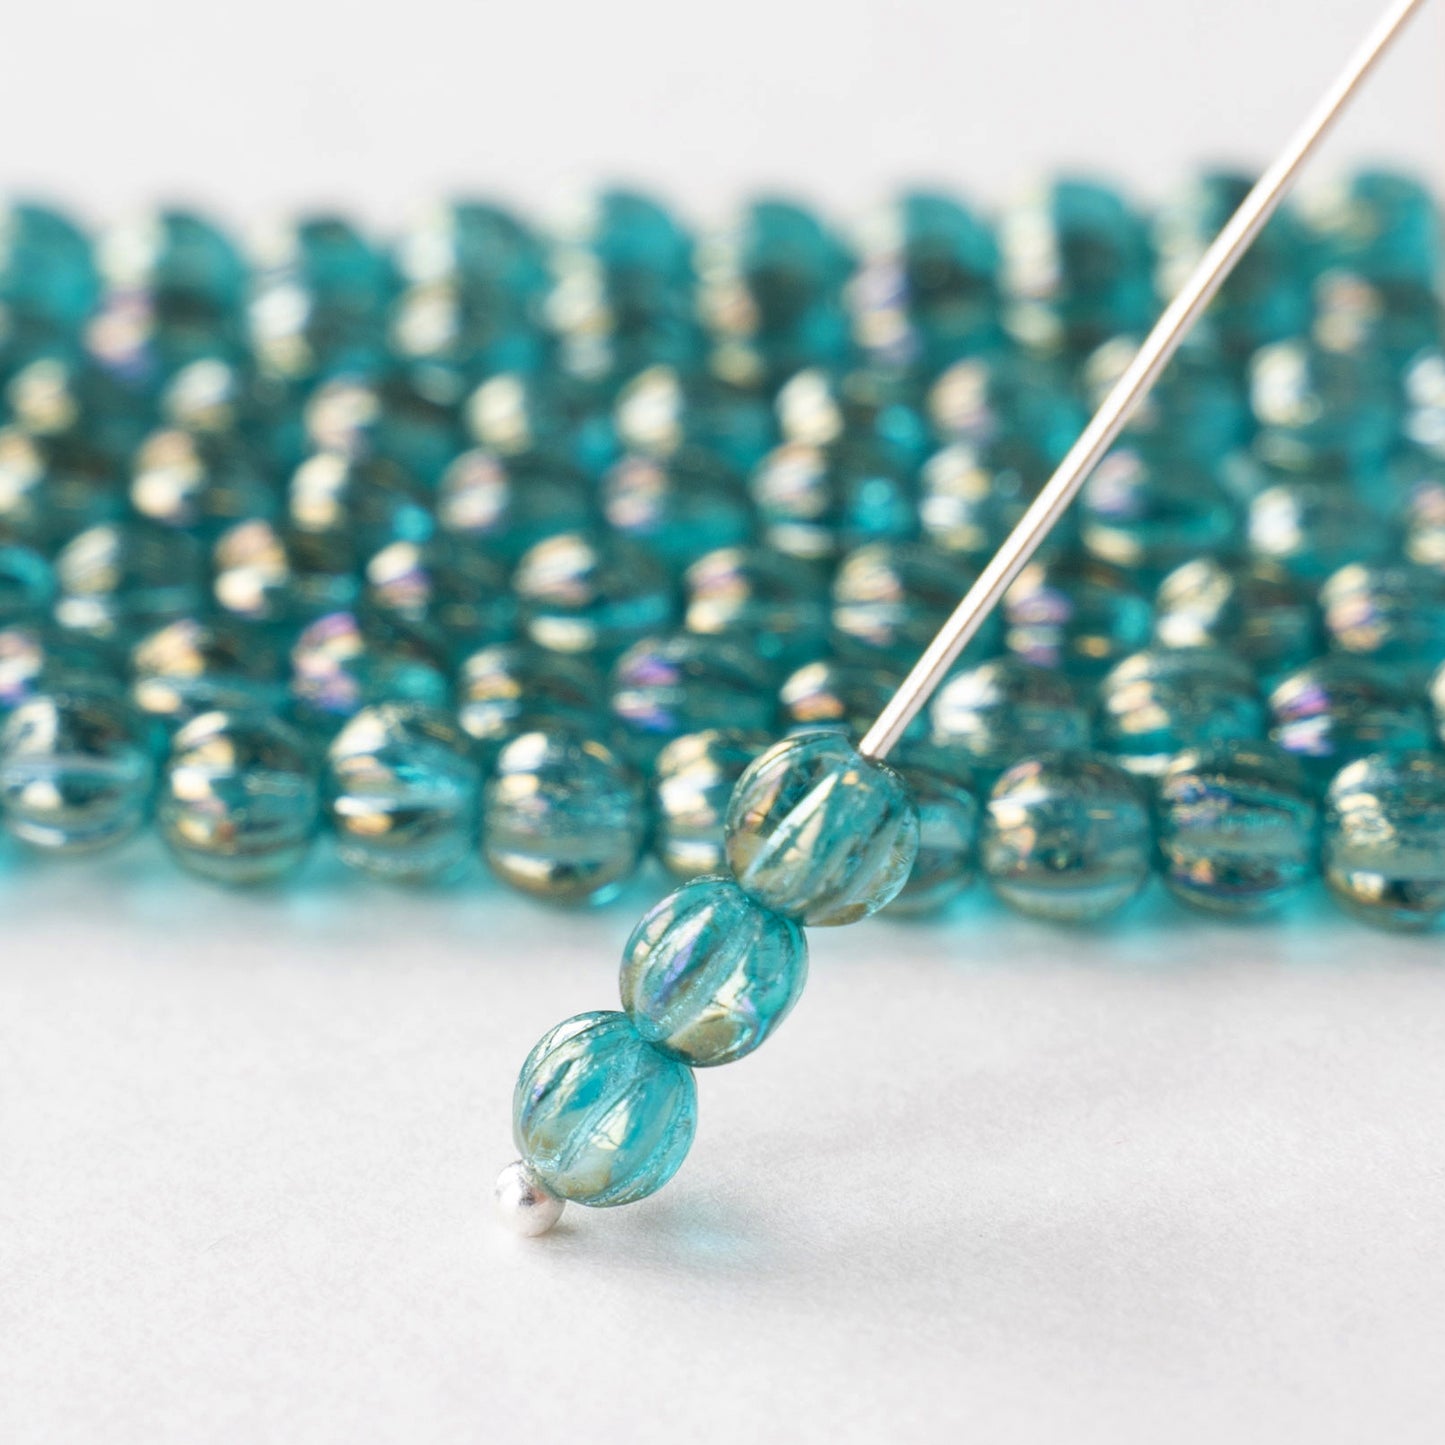 Load image into Gallery viewer, 5mm Melon Bead - Aquamarine Luster - 100 Beads
